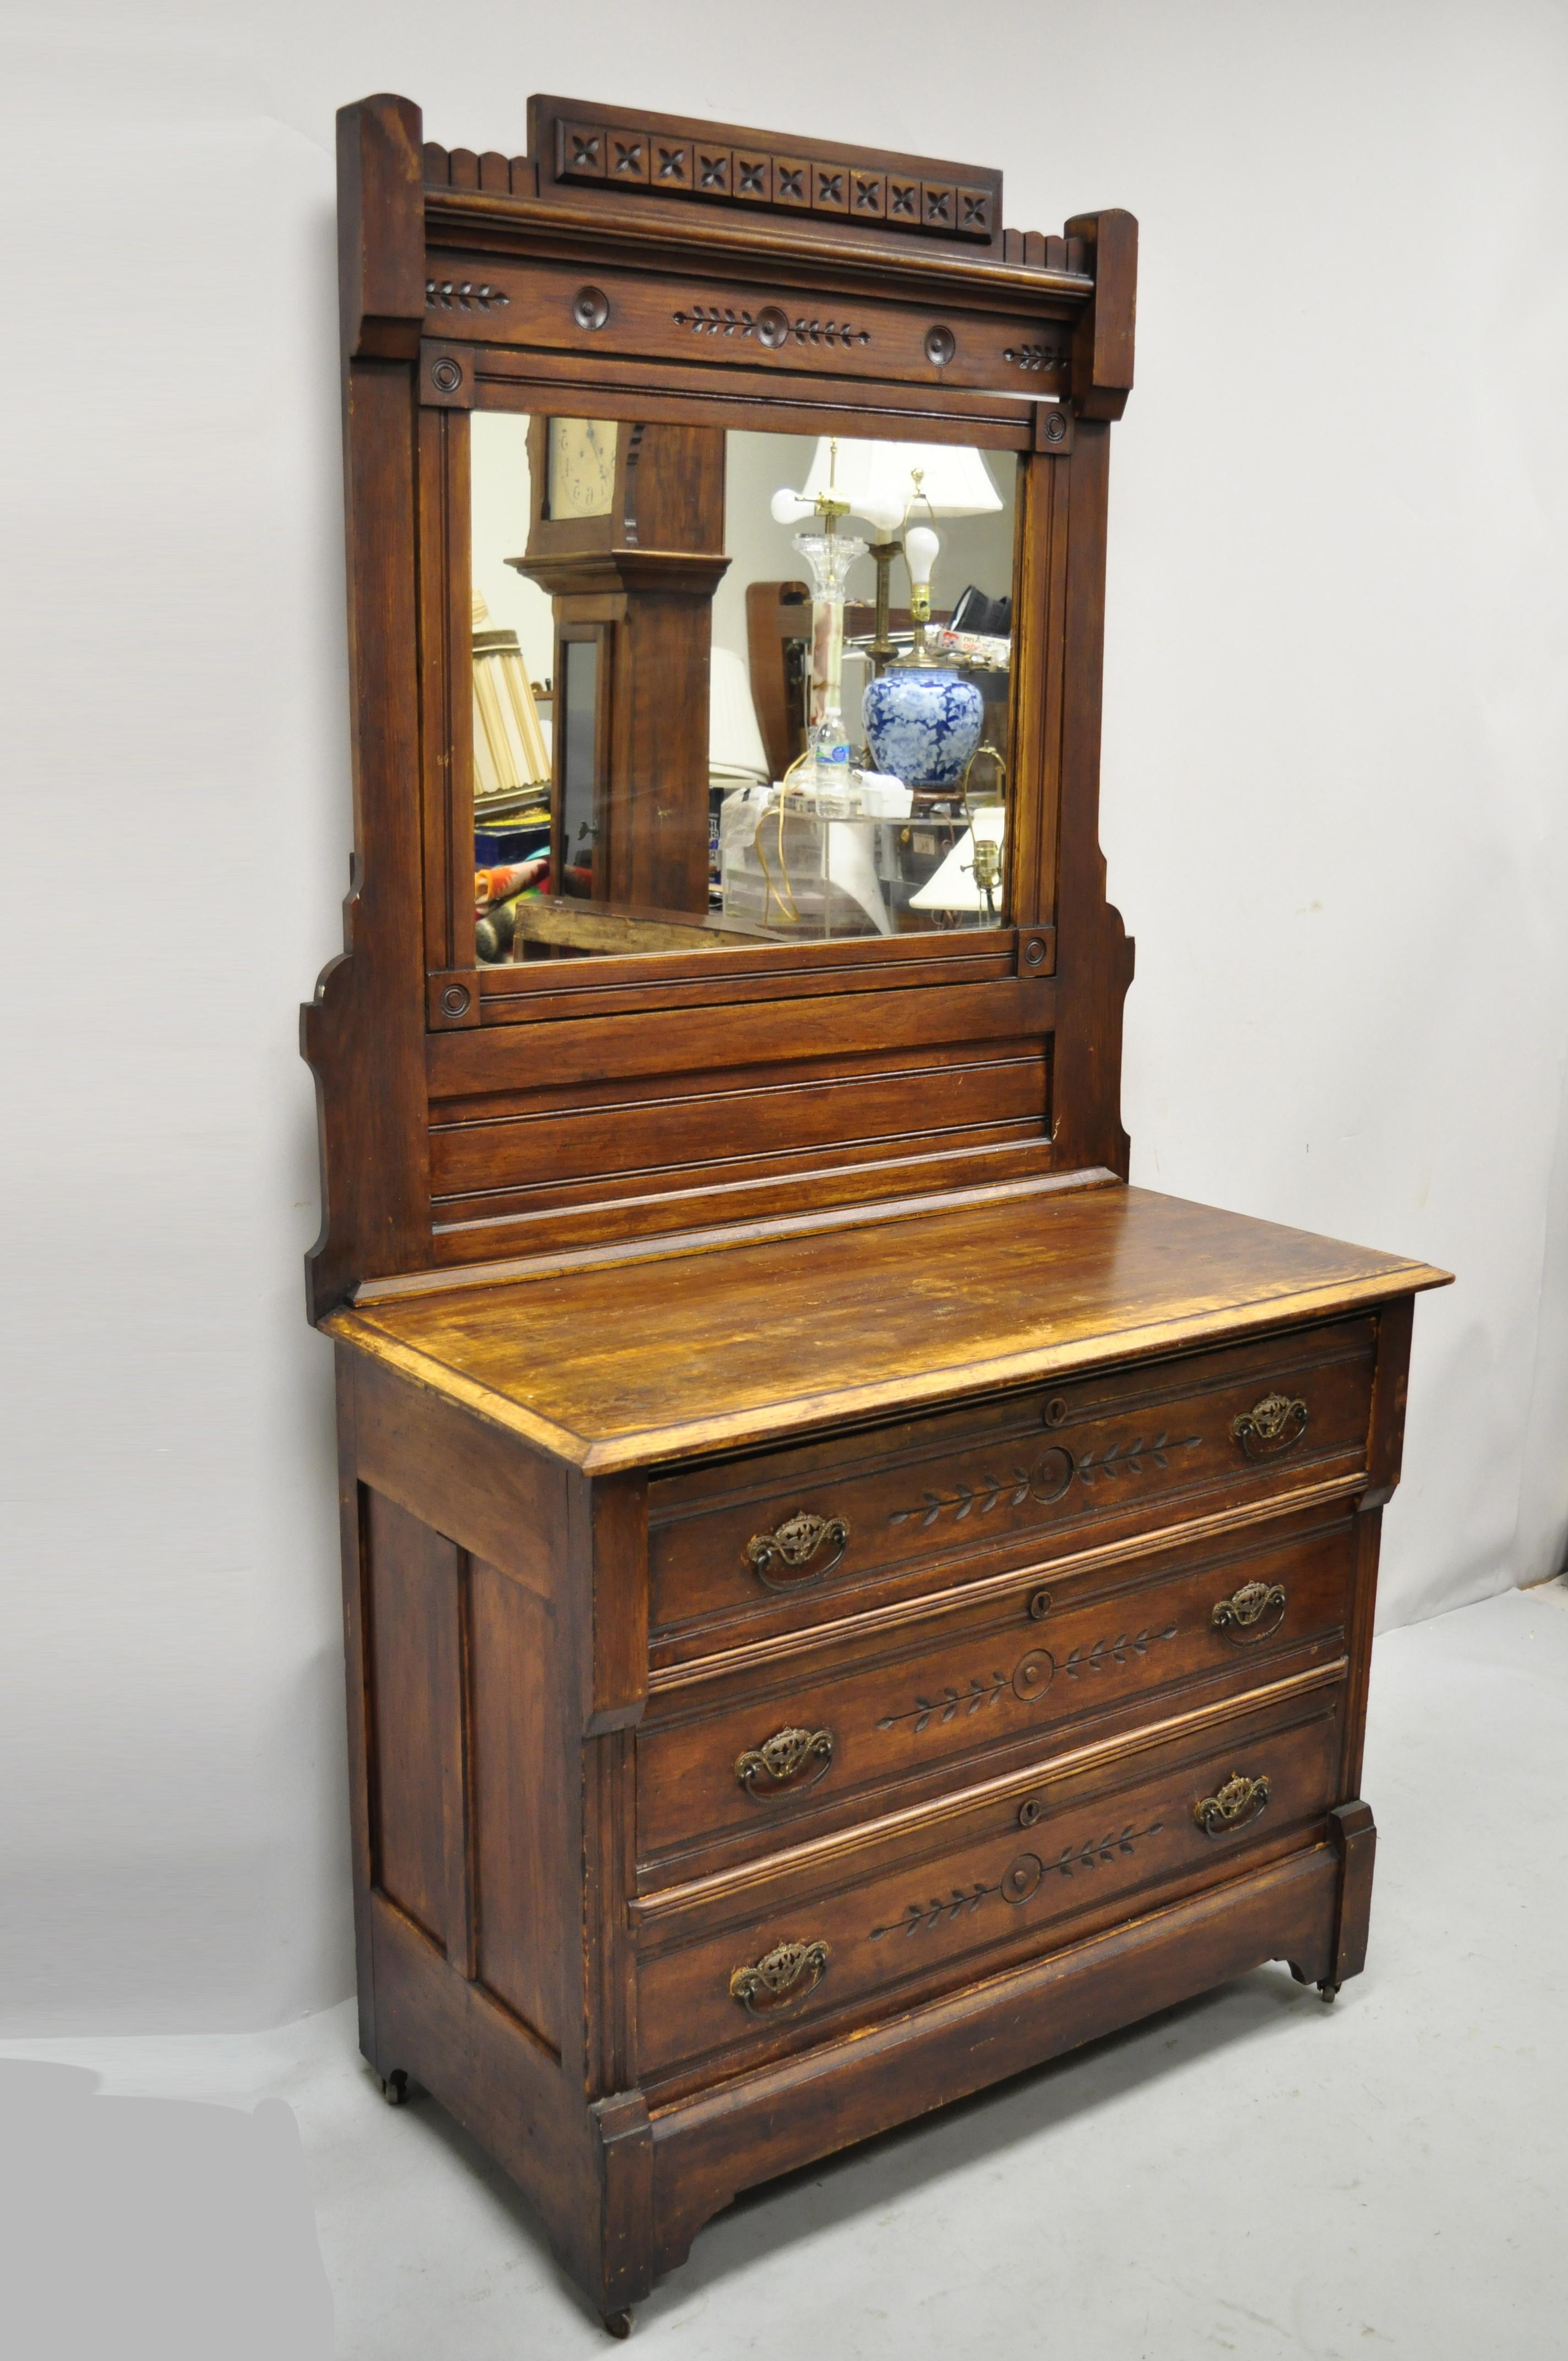 Antique American Eastlake Victorian walnut 3 drawer dresser and mirror. Item features tall mirror, solid wood construction, beautiful wood grain, distressed finish, no key, but unlocked, 3 drawers, brass hardware, very nice antique item, quality